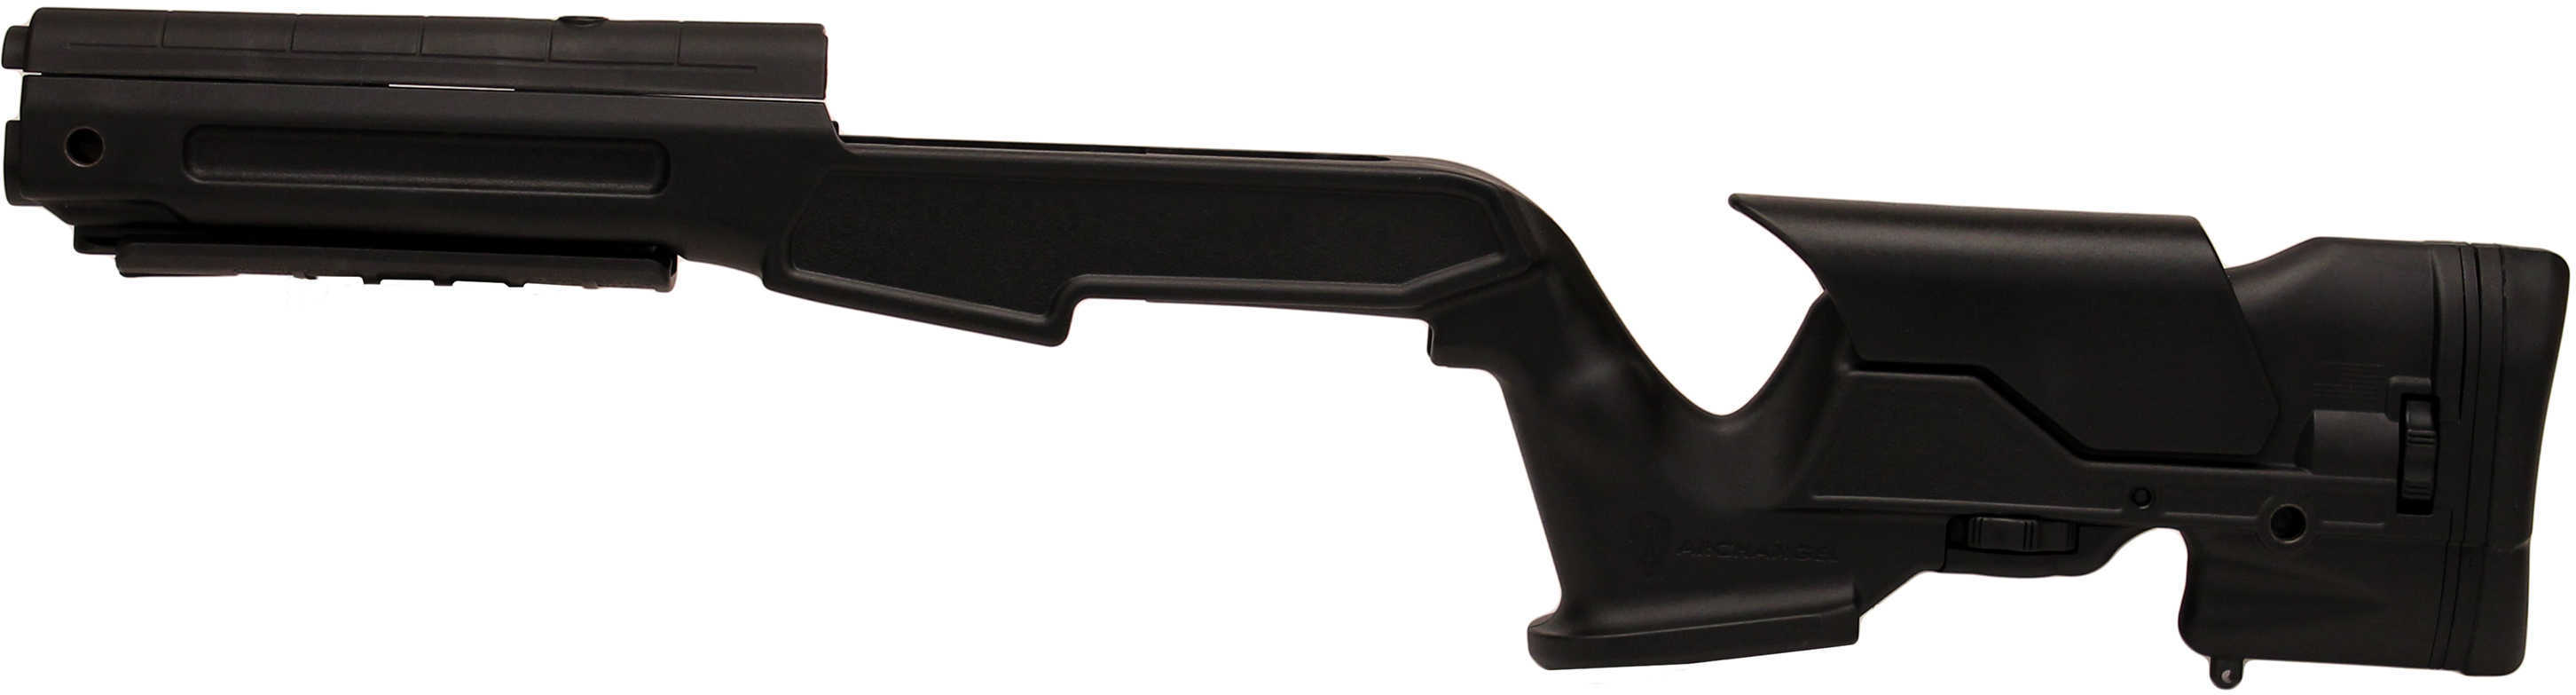 ProMag Archangel Precision Stock Ruger Mini 14 Thirty